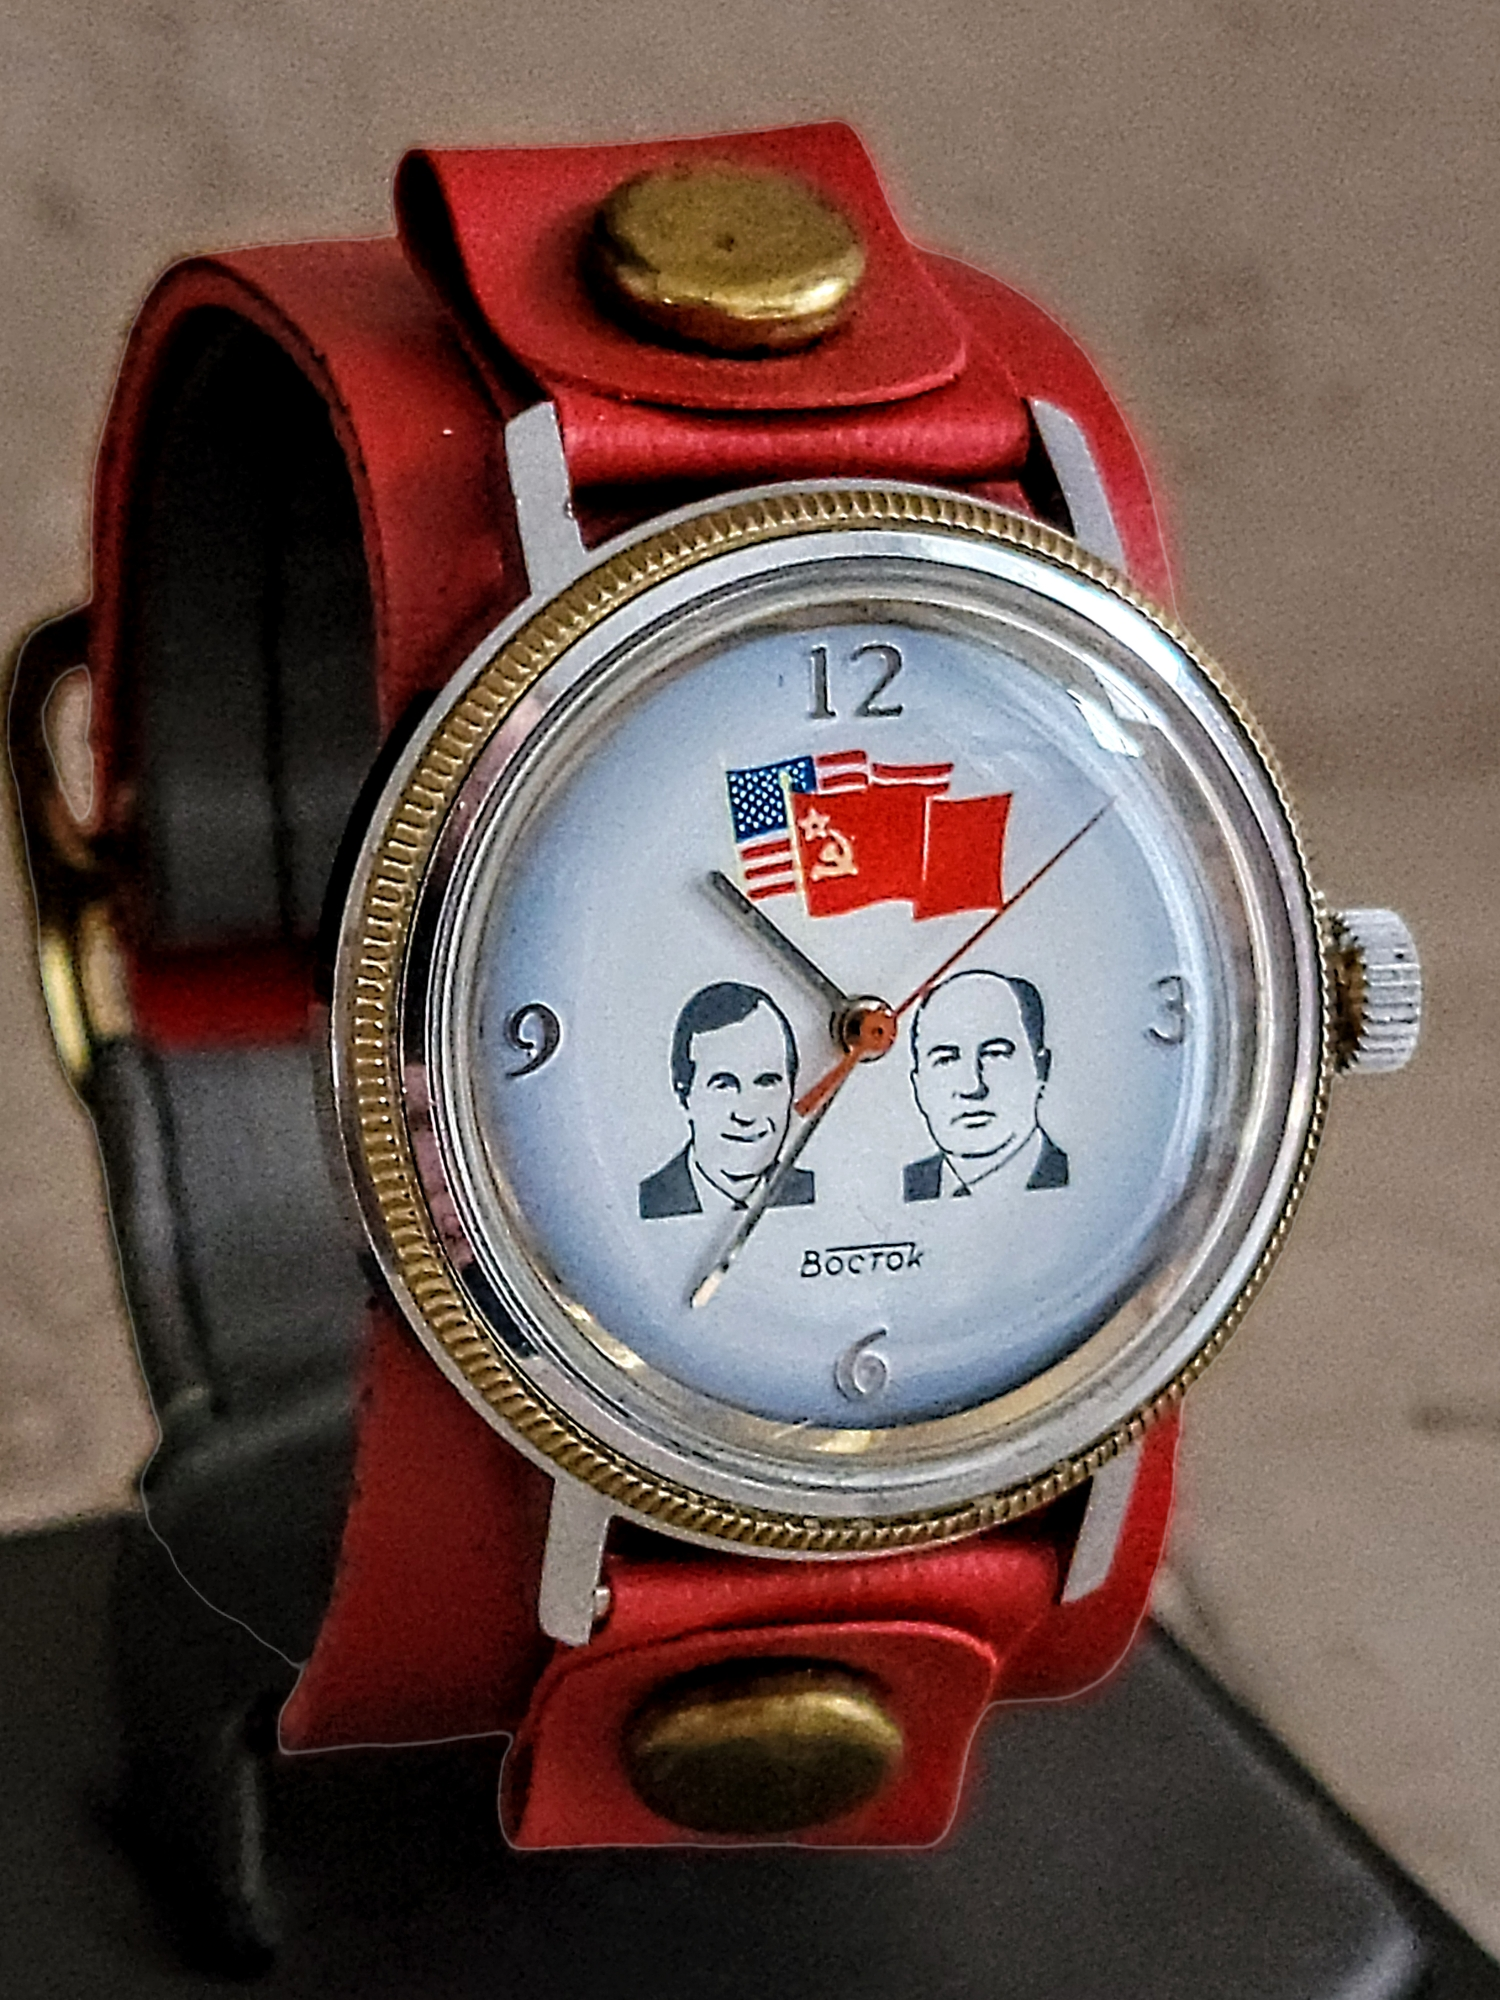 Boctok/Vostok Automatic watch stopped working after over-winding. The top  gear fell off, but even when i wind it, it doesn't go around :( Please  help! 🥰 : r/watchrepair